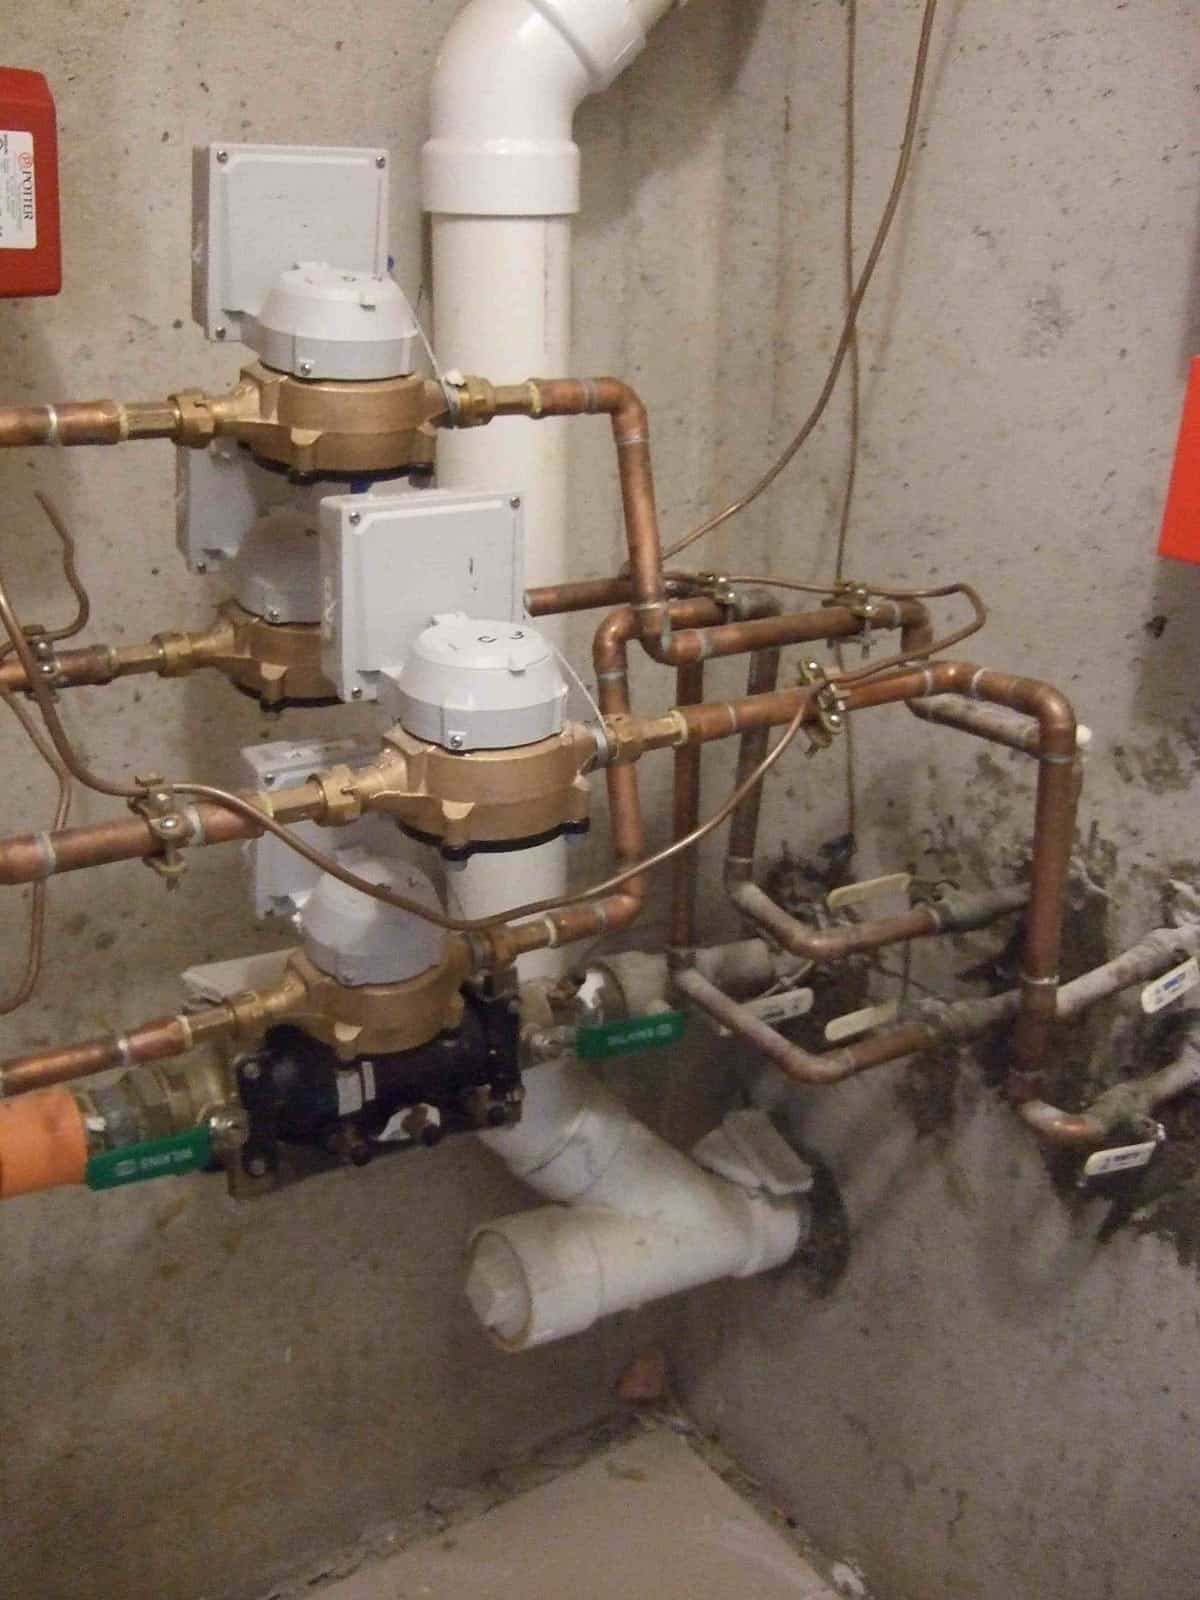 Complex network of pipes and valves for drinking water in a utility room.